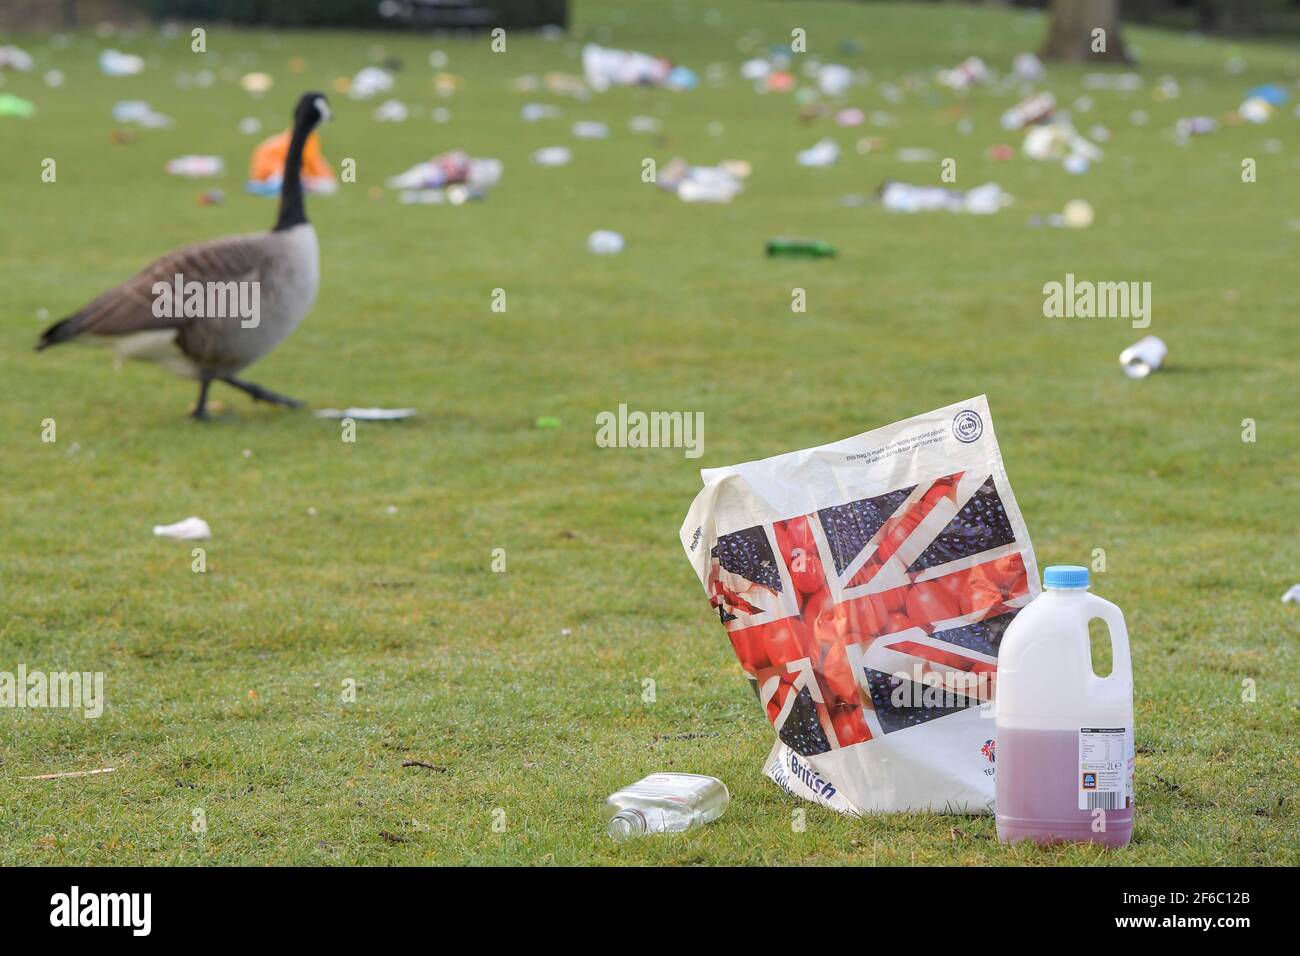 Birmingham, West Midlands, UK. 31st Mar, 2021. A sea of litter was left strewn across Cannon Hill Park this morning after scores of people came to sunbathe in yesterday's record breaking March temperatures. Glass bottles, hippy crack gas cannisters and BBQ's were dumped on the grass. A Canada Goose waddled through the heart breaking mess in almost disbelief at what its home has become. Waste bins were also overflowing with trash. Pic by Credit: Sam Holiday/Alamy Live News Stock Photo